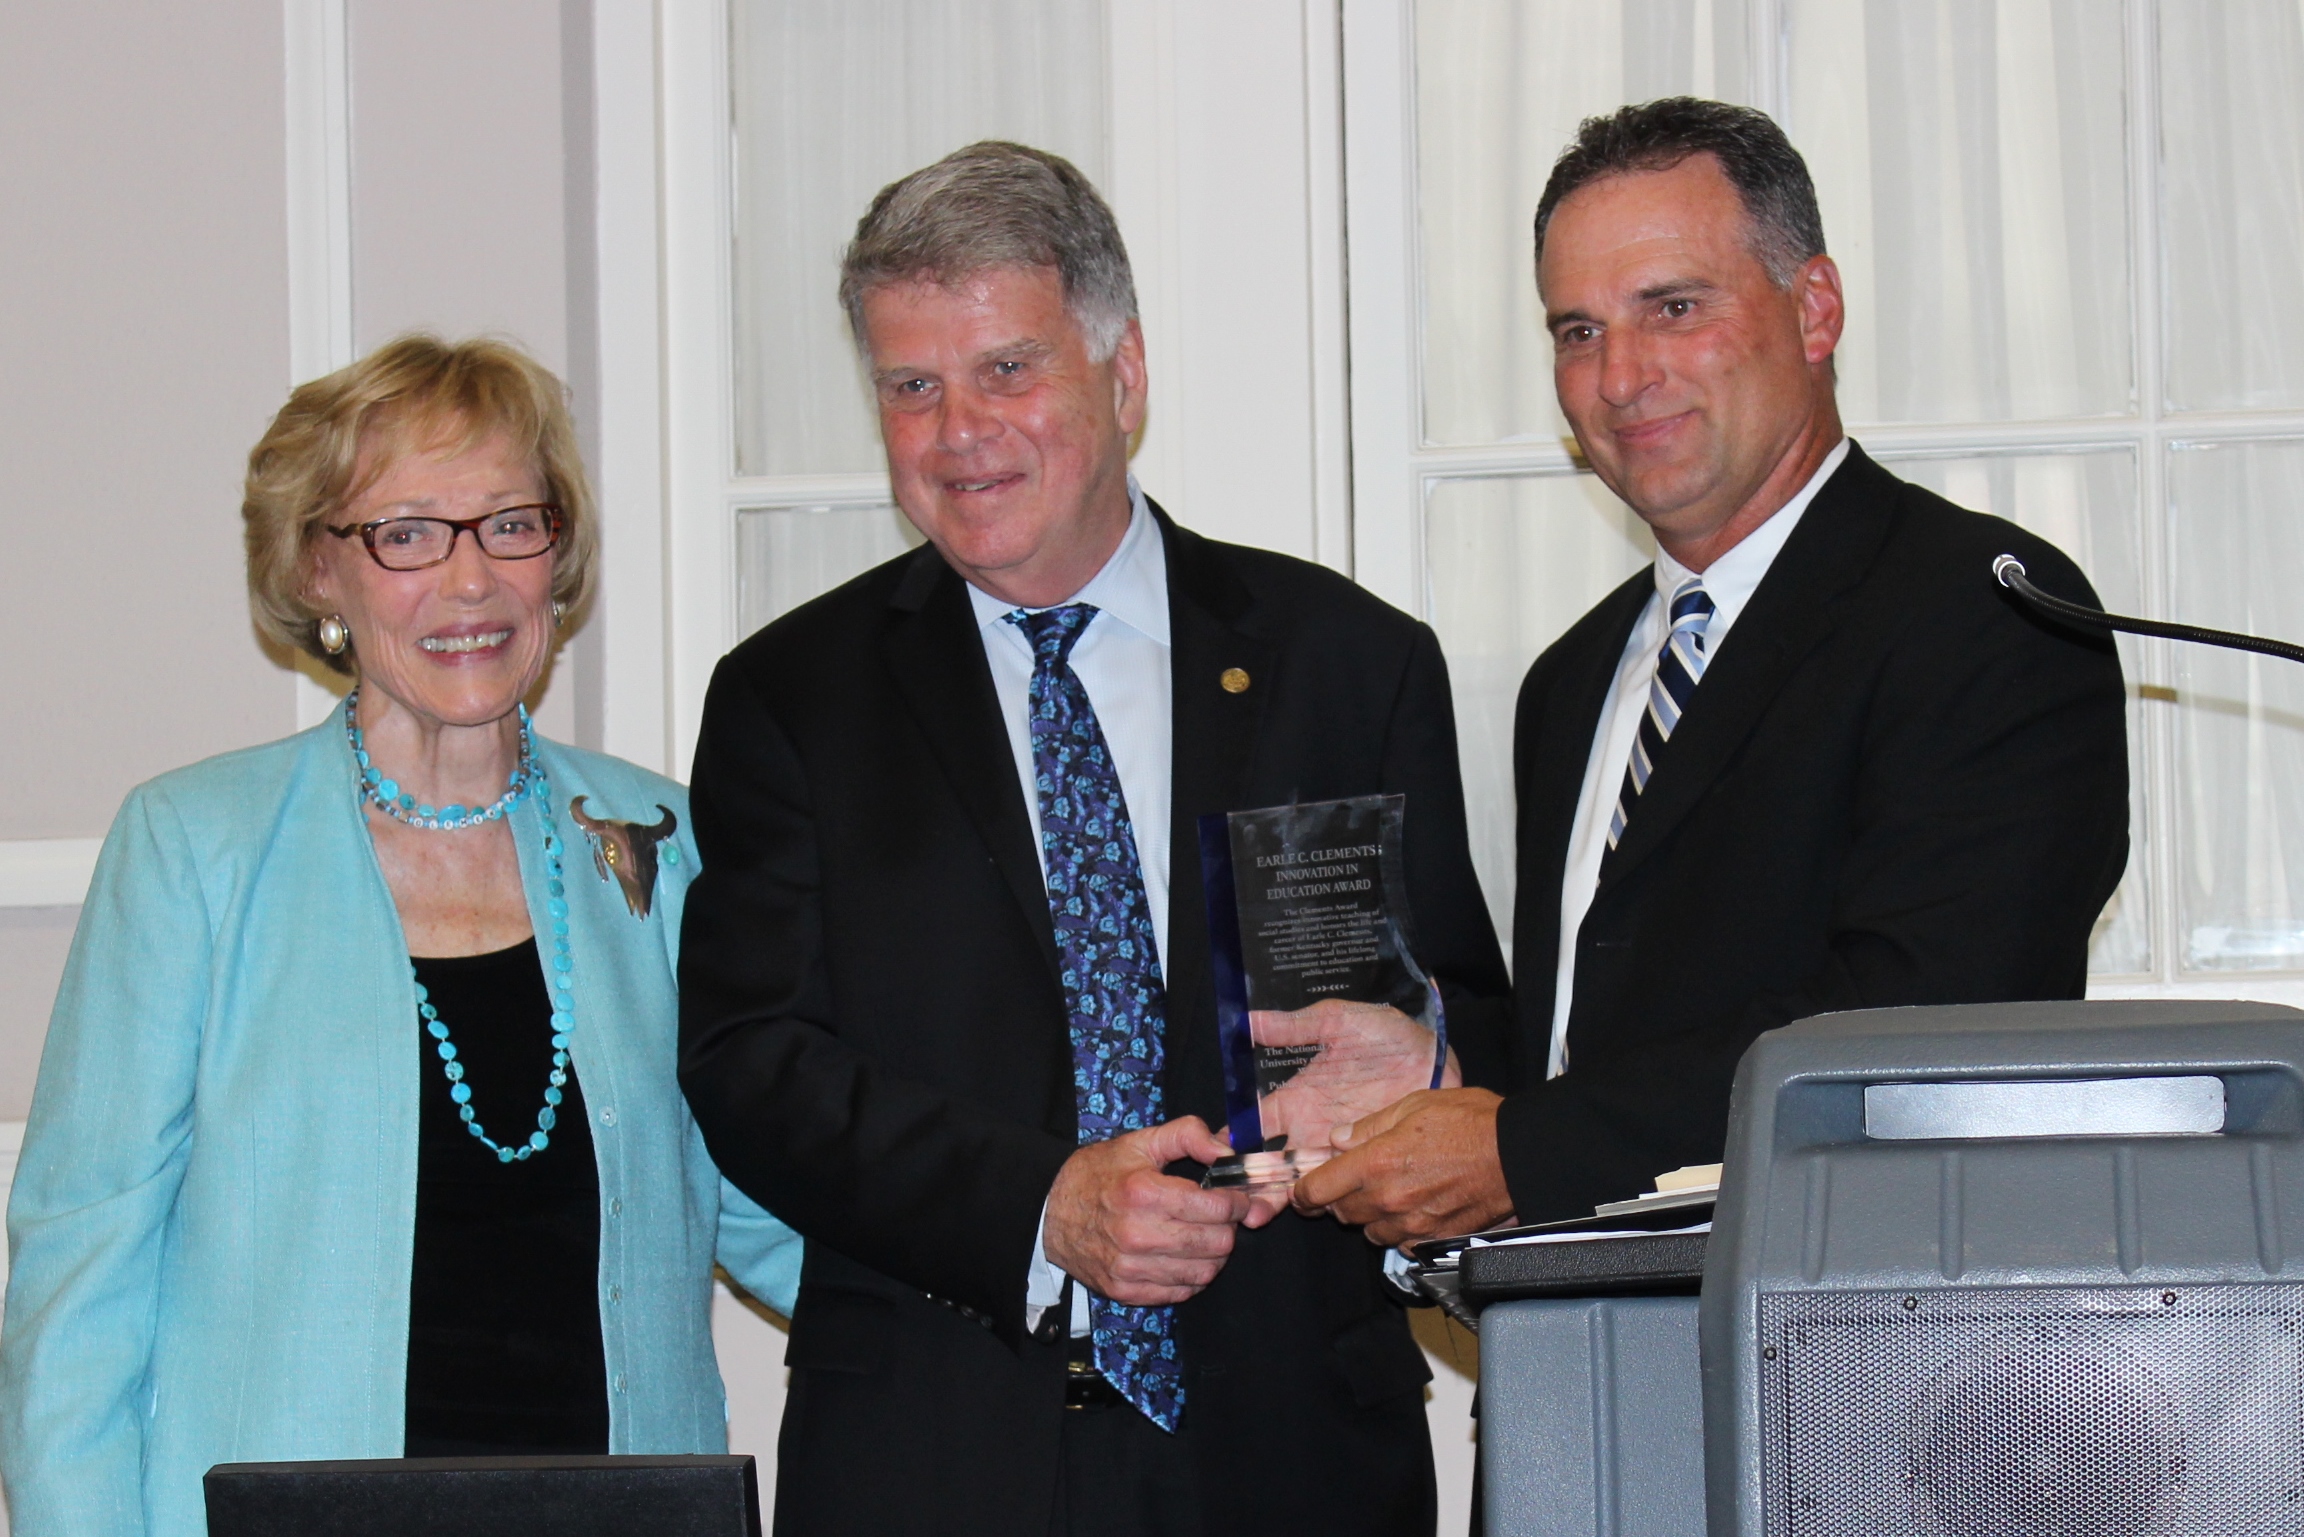 Timothy Peterson, right, a social studies teacher at Taylor County High School, receives the inaugural Earle C. Clements Innovation in Education Award for Civics and History Teachers from Bess Clements Abell, left, the daughter of the late Earle C. Clements, and Archivist of the United States David S. Ferriero, center, during a ceremony at the University of Kentucky. Photo submitted, July 8, 2015